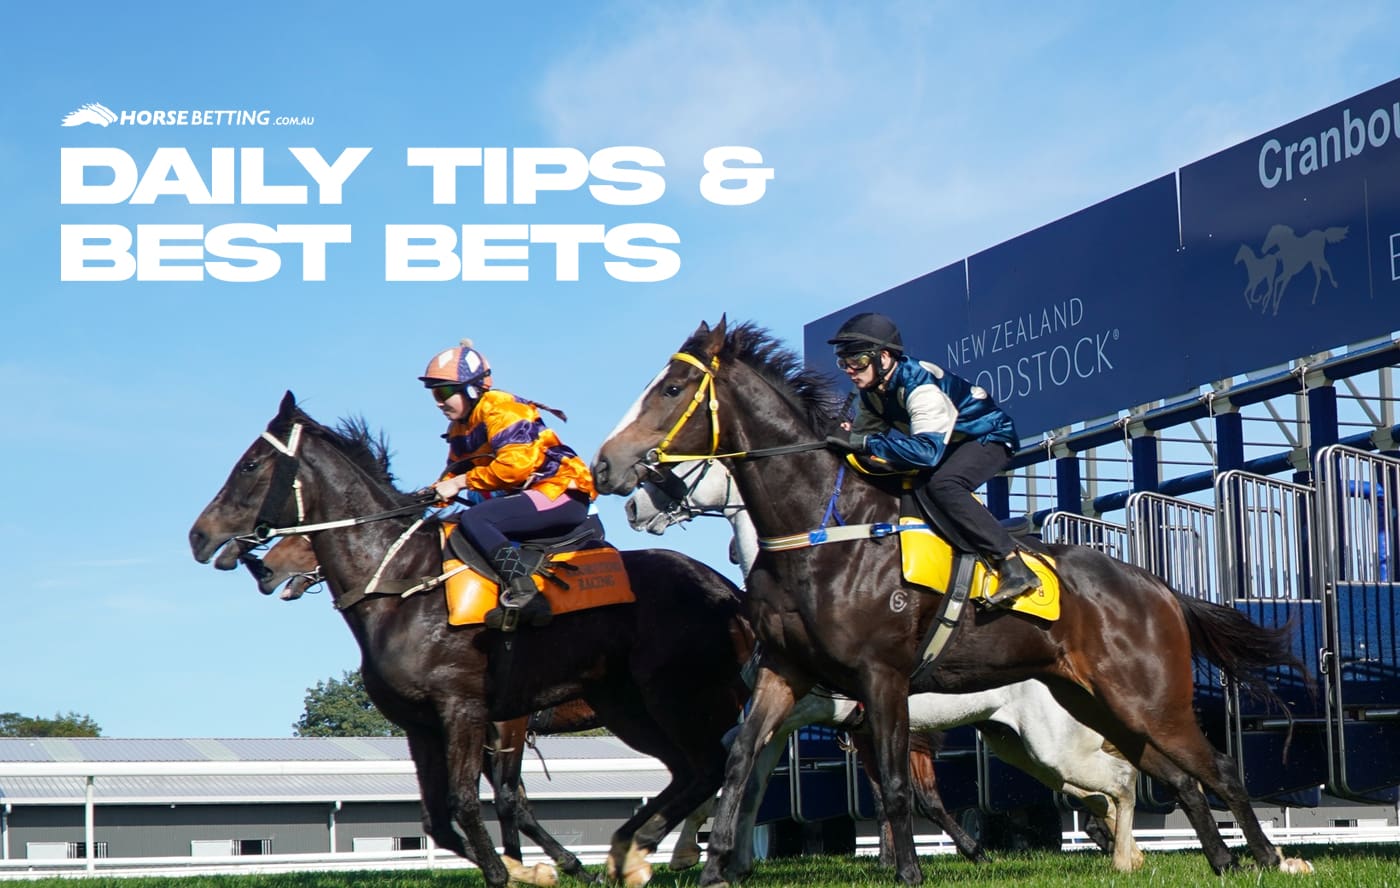 Cranbourne and Tamworth horse racing tips & best bets